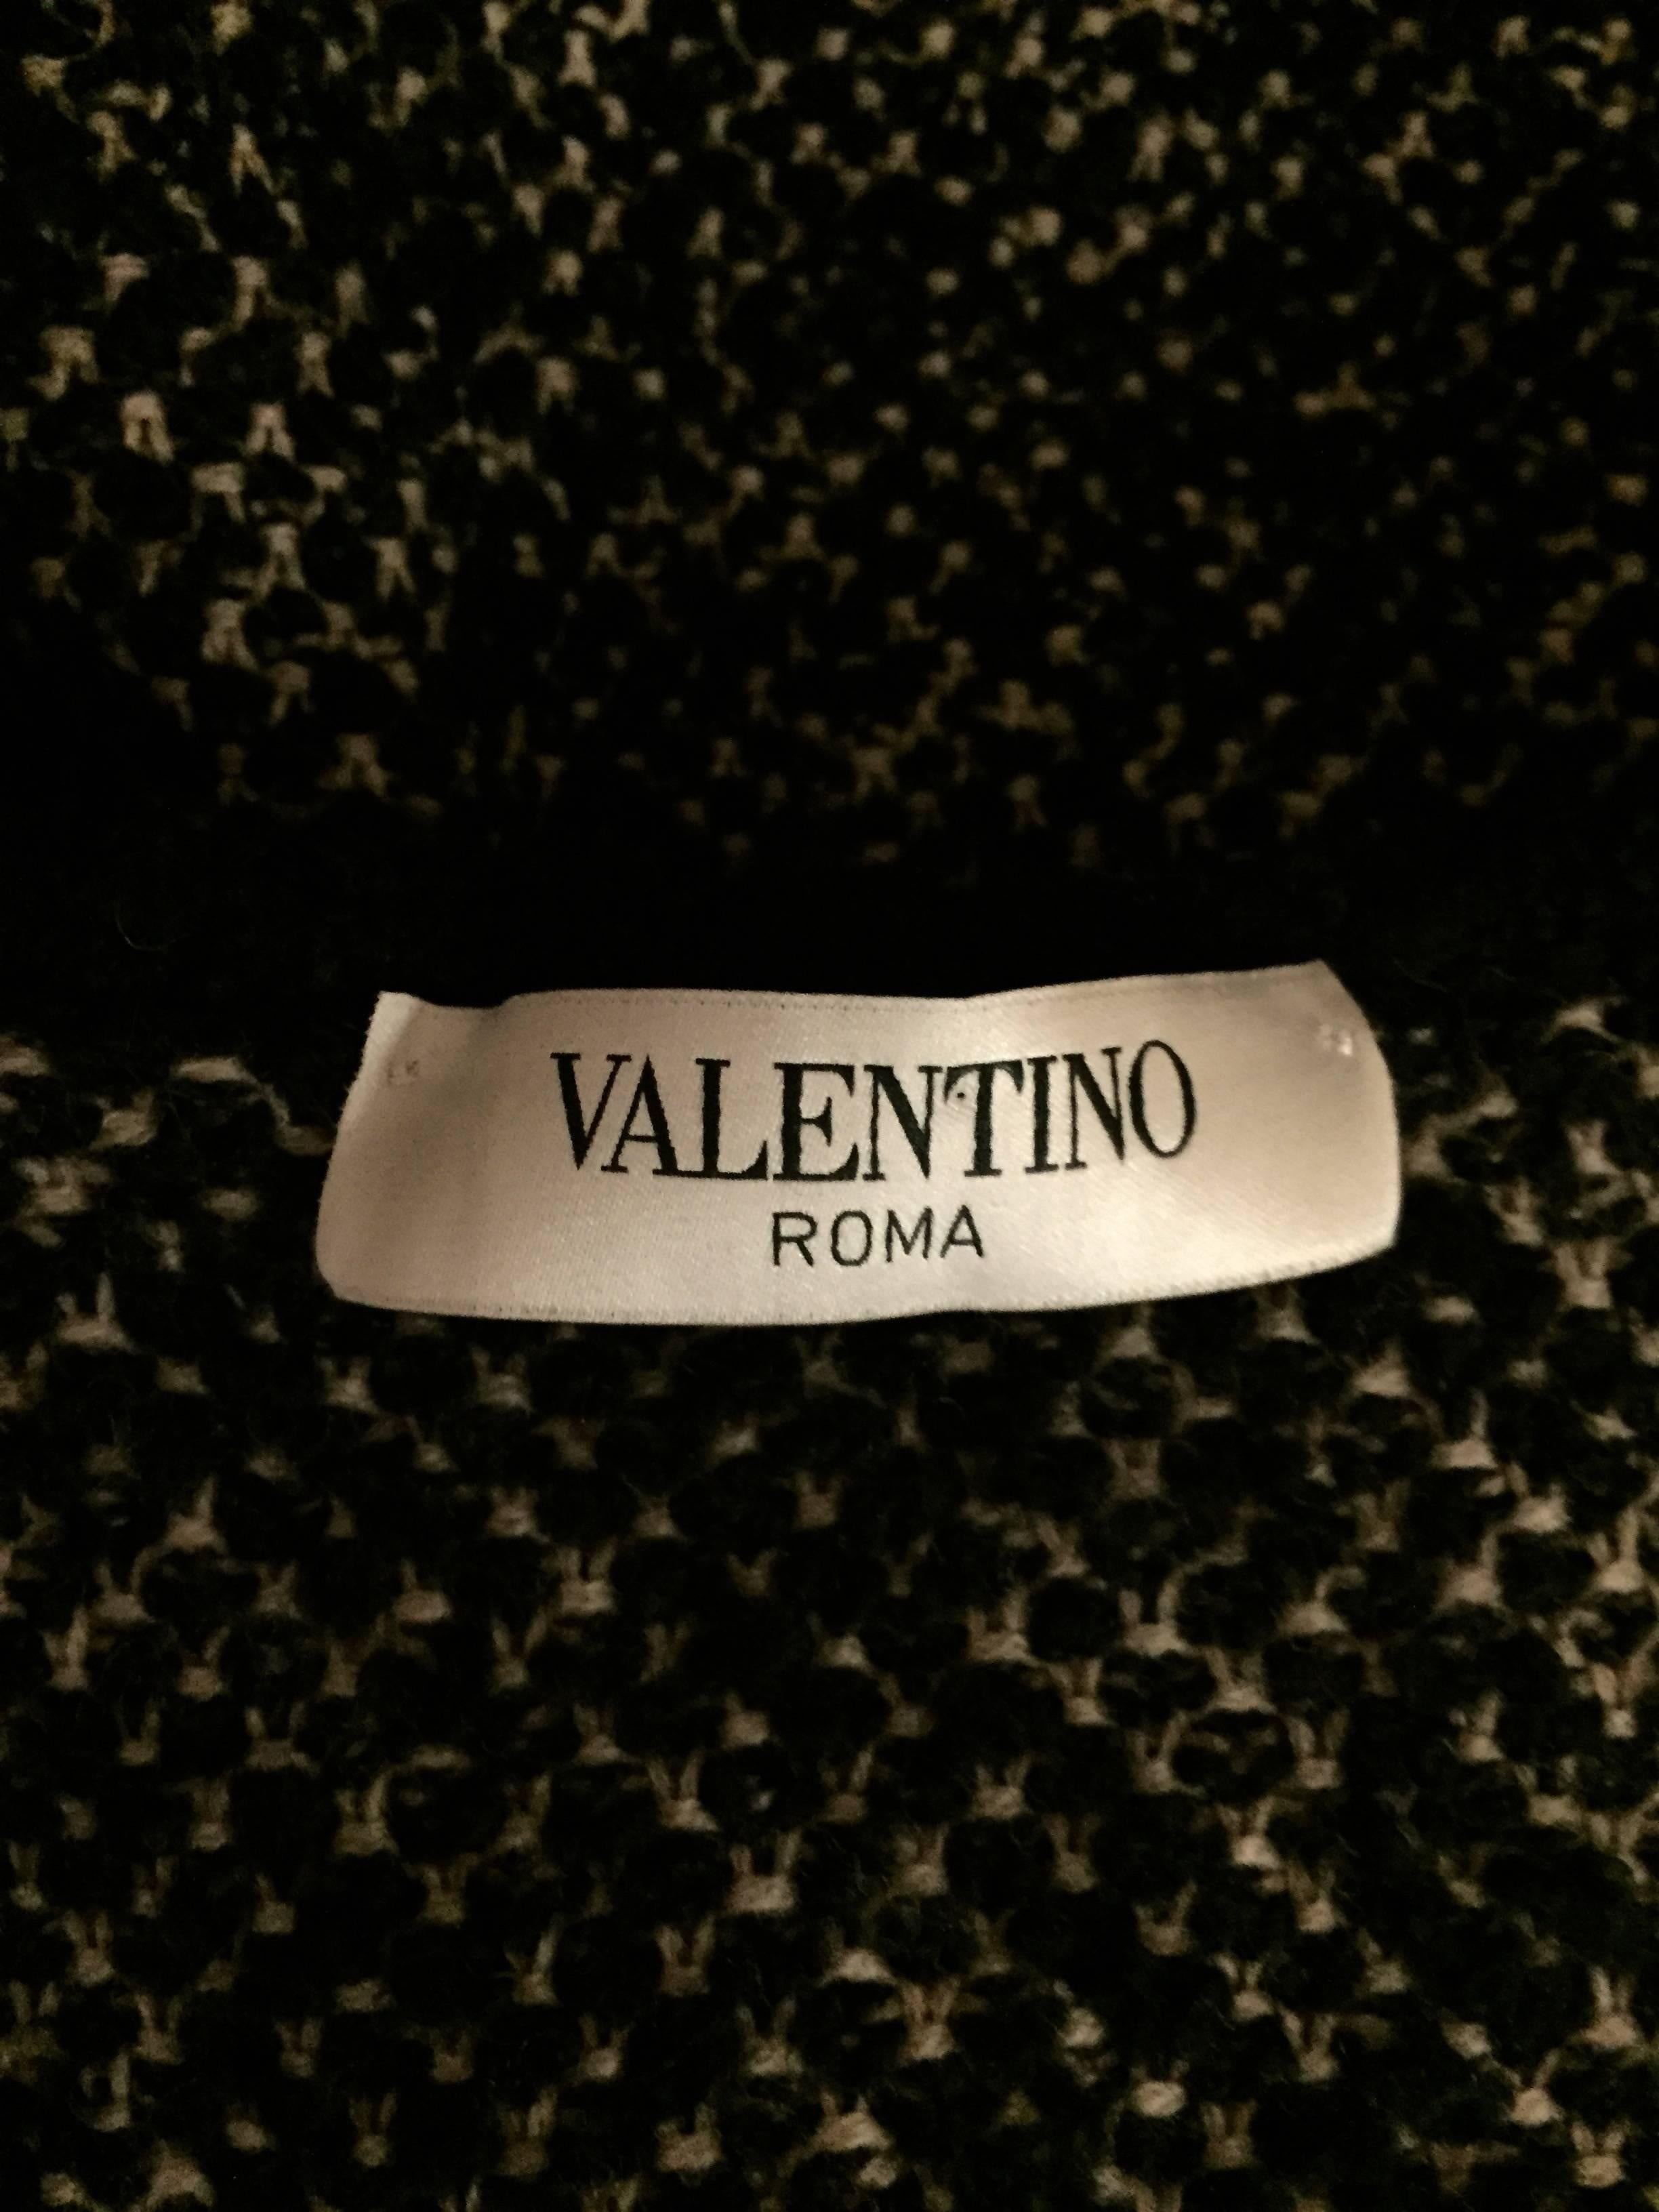 This Valentino tweed black and grey wool sweater jacket has 4 hidden snaps for closure at front and decorative black trim around round neckline, front closure and waist.  Complementary pleats accentuate jacket below the waistline.  Unlined.  Will